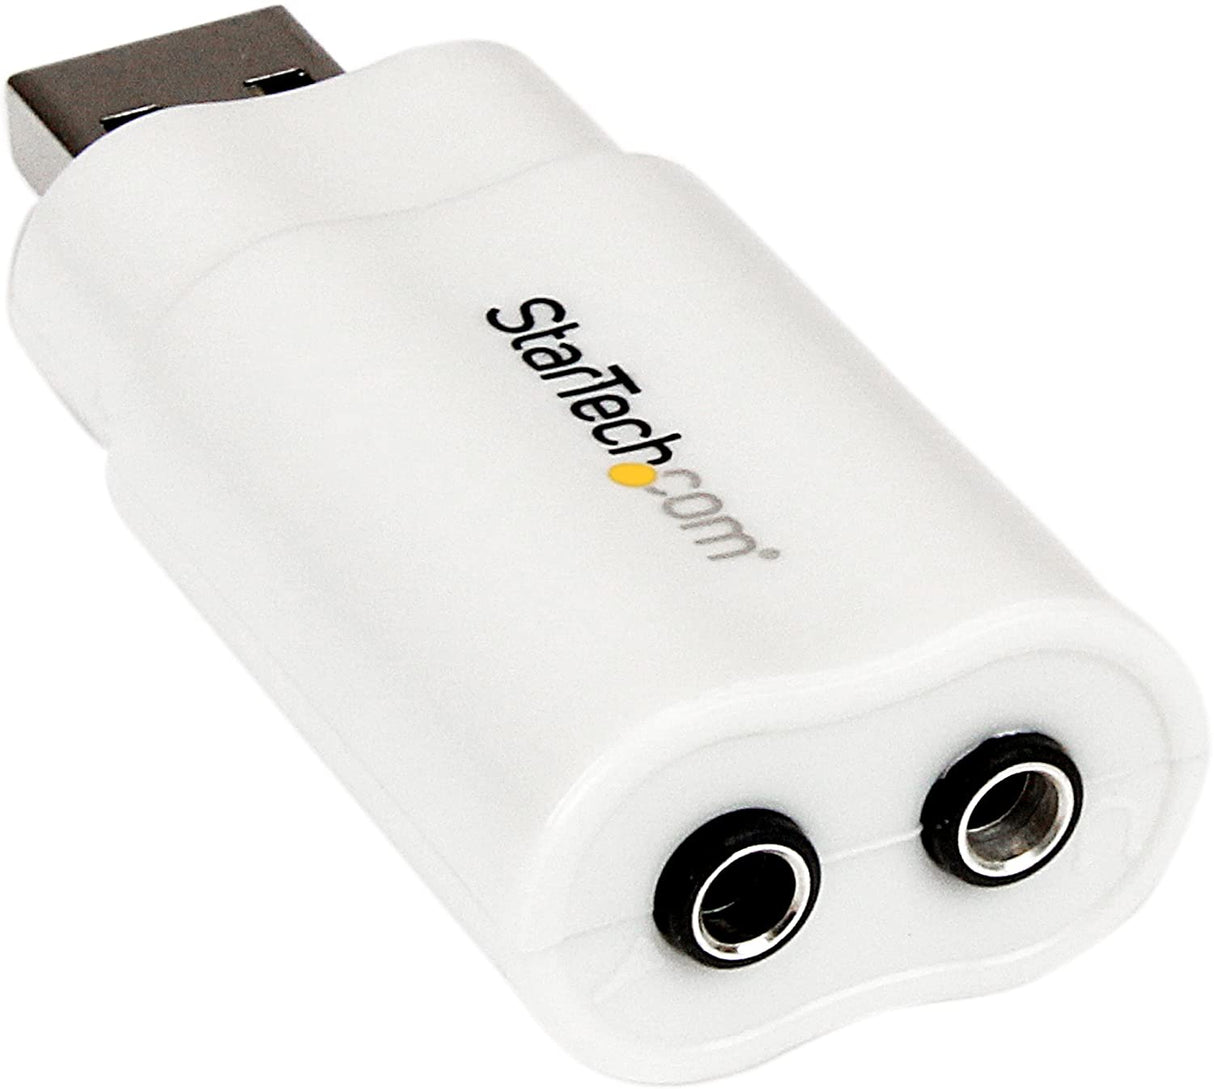 StarTech.com USB to Stereo Audio Adapter Converter ICUSBAUDIO, White, One Size